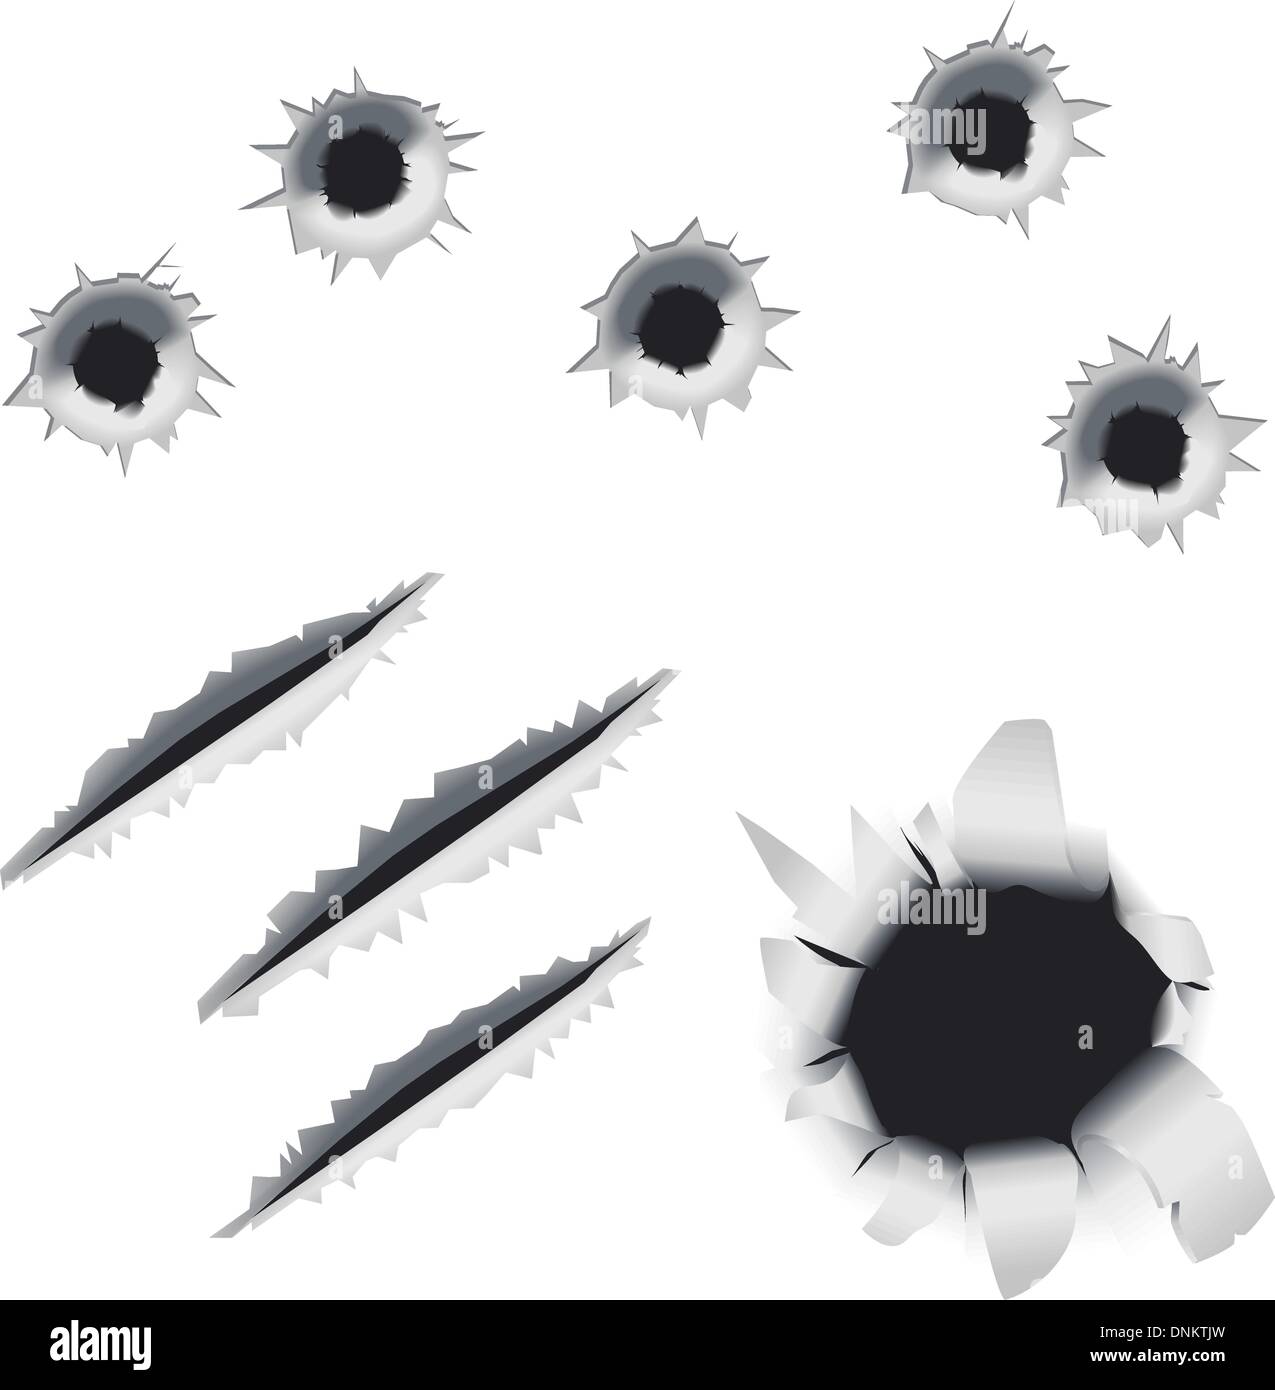 A collection of bullet holes and slashes. Stock Vector